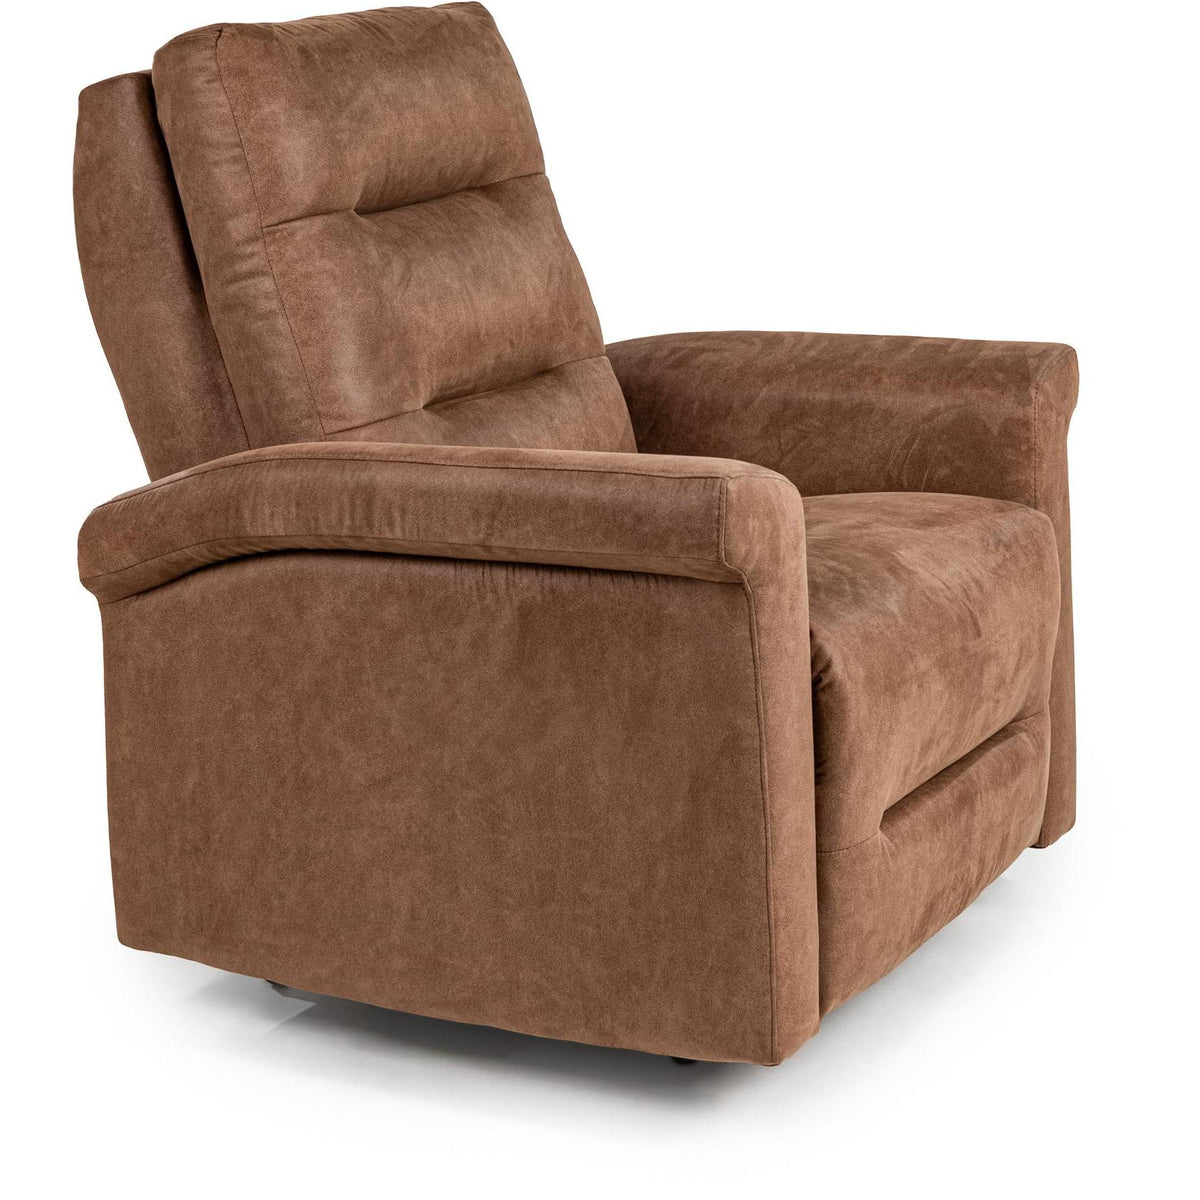 Ryleigh Rocker Leather Recliner IMAGE 1